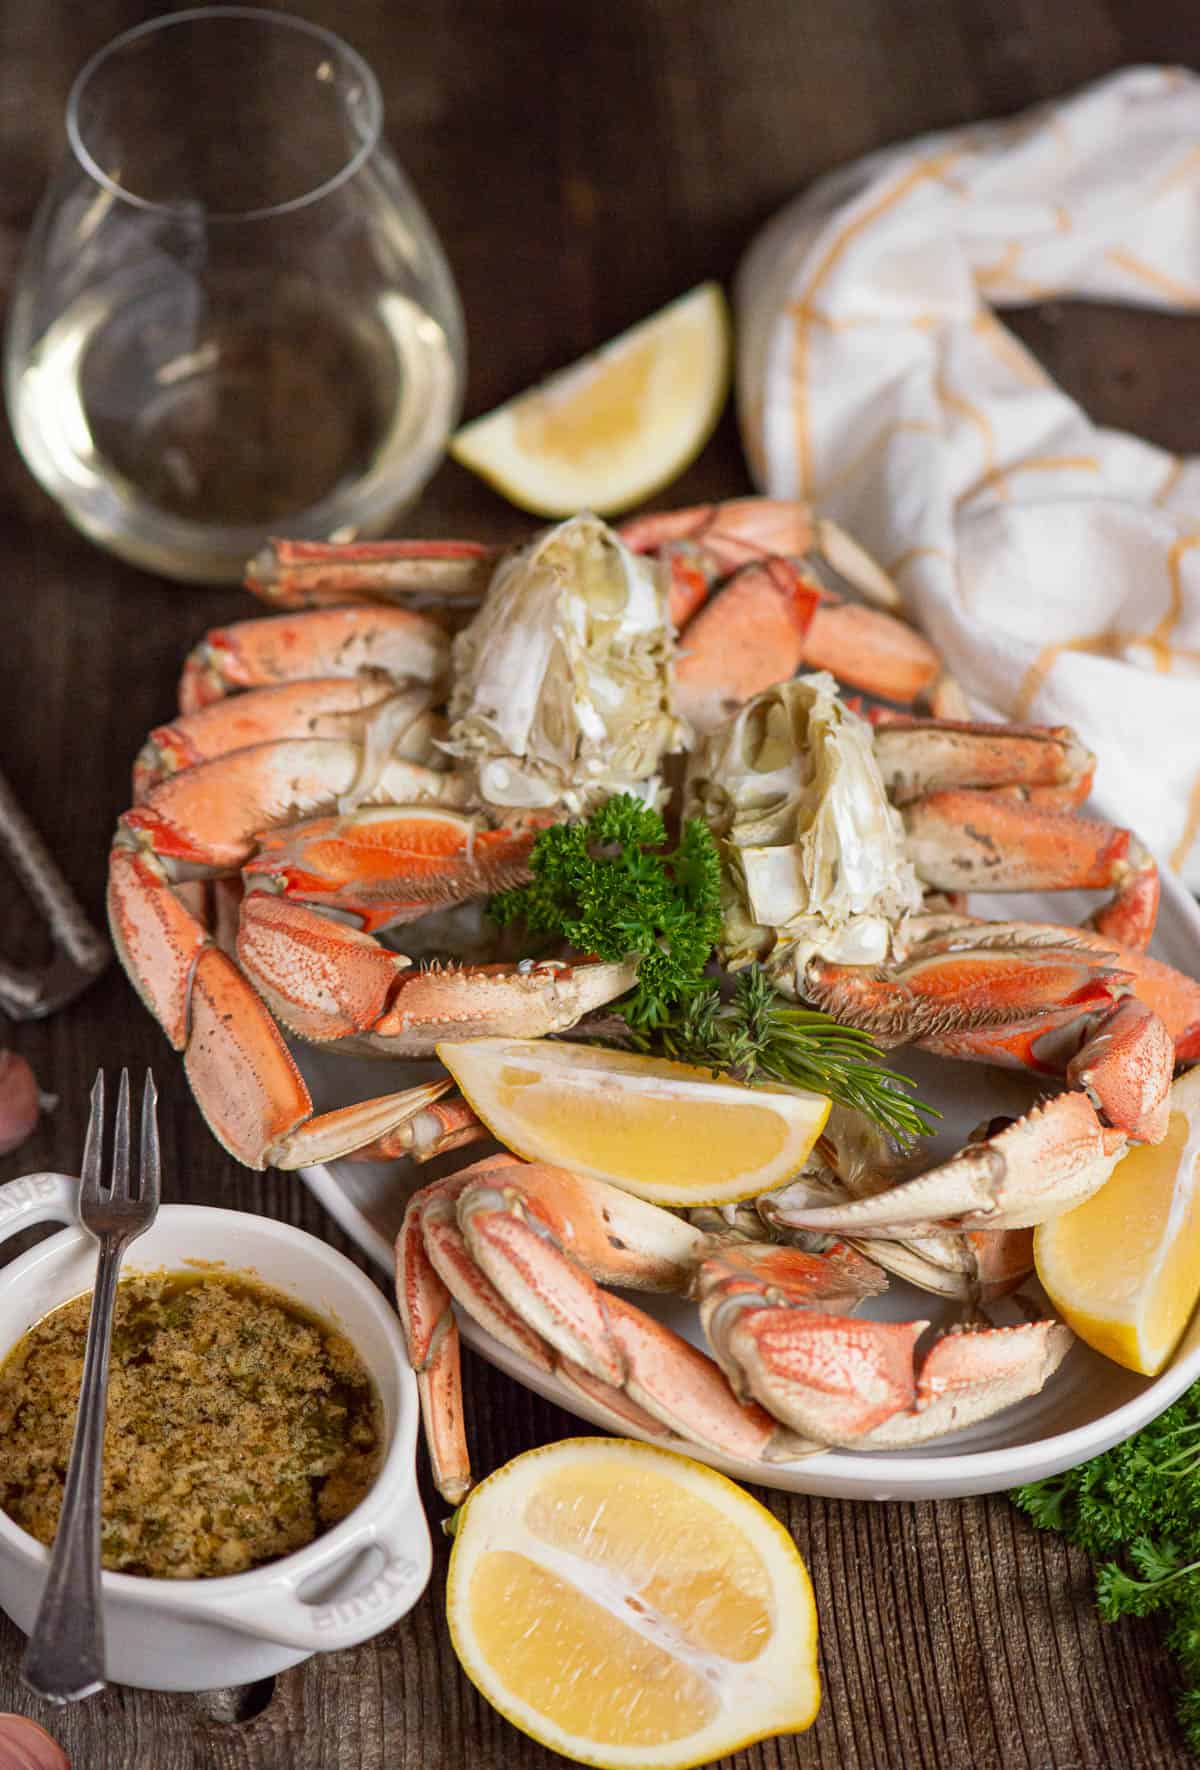 steamed Dungeness crab legs with garlic butter.